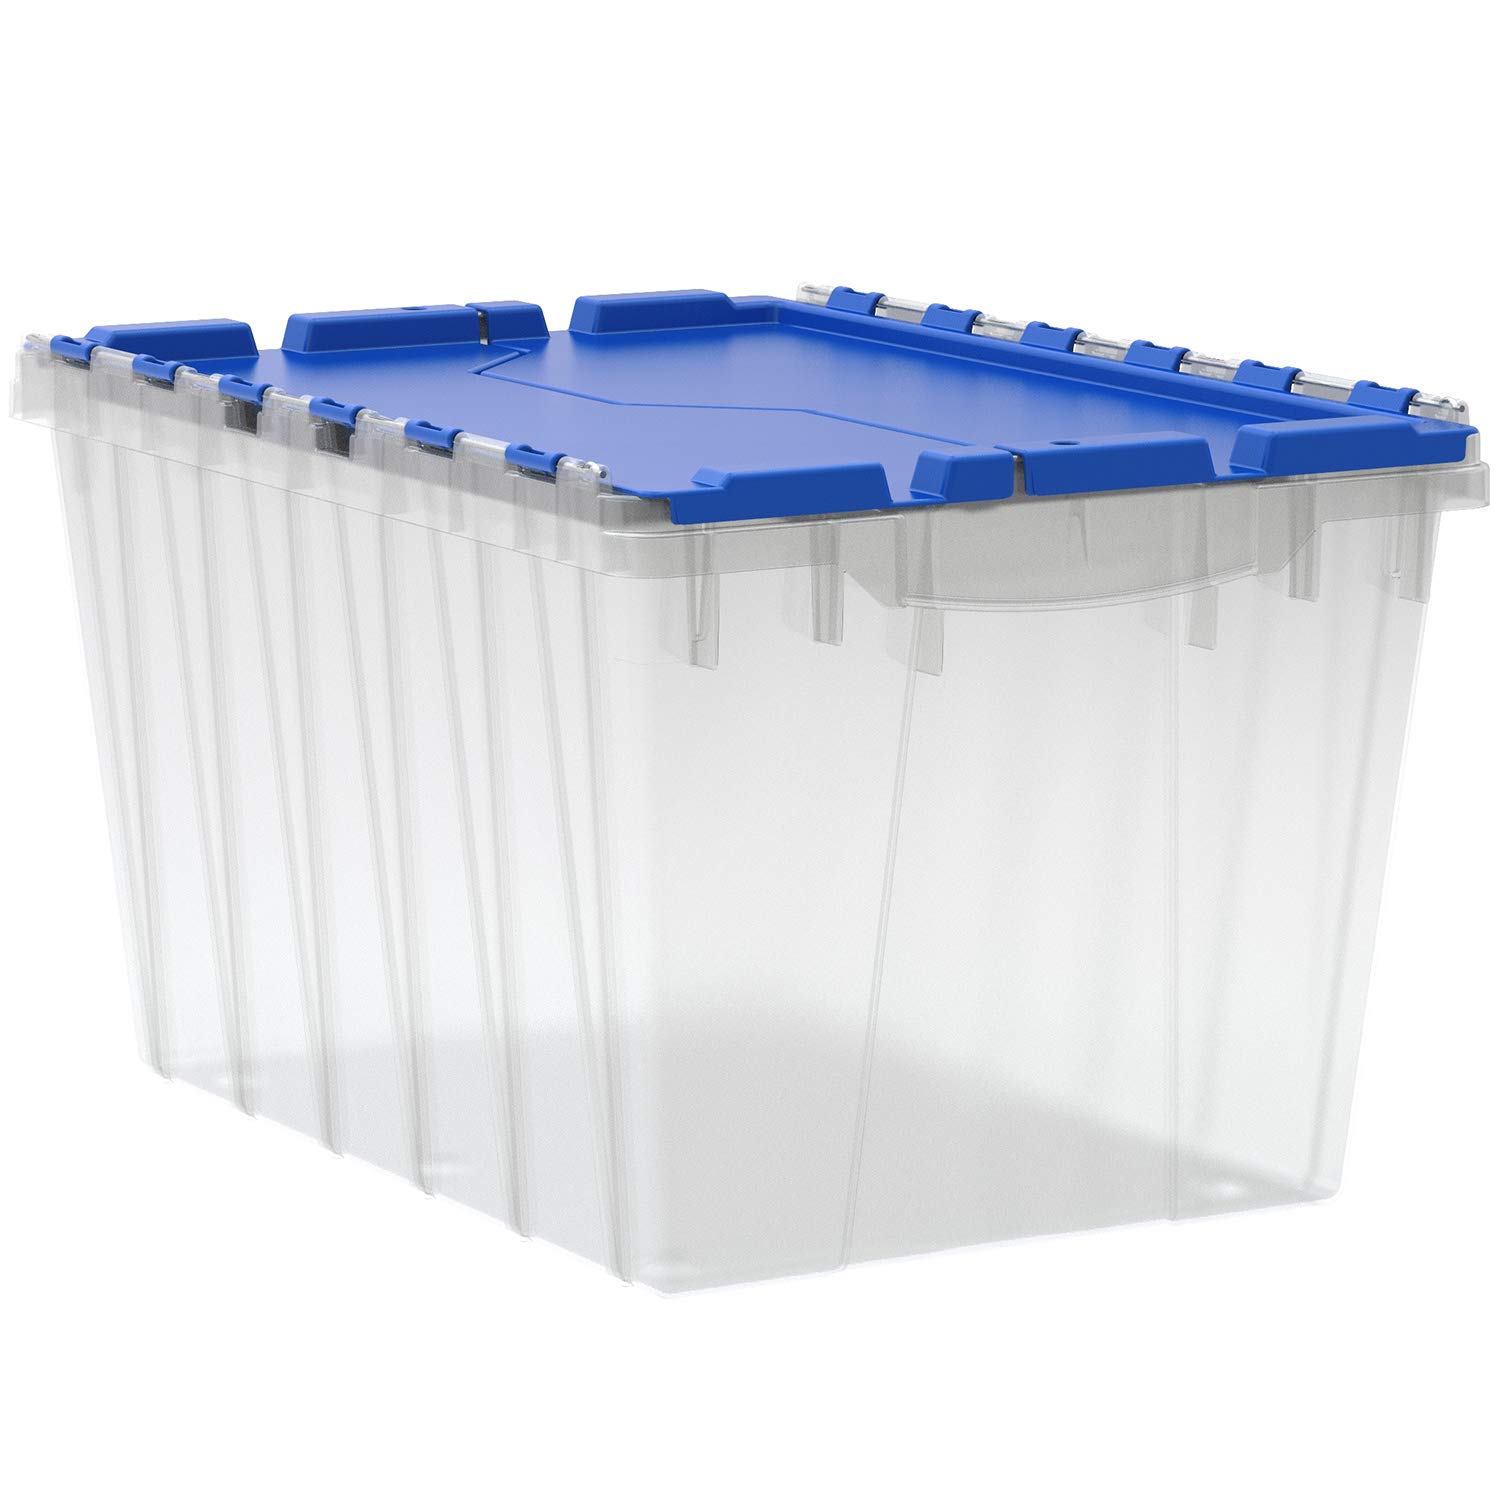 Book Cover Akro-Mils 66486 12-Gallon Plastic Stackable Storage Keepbox Tote Container with Attached Hinged Lid, 21-1/2-Inch x 15-Inch x 12-1/2-Inch, Clear/Blue